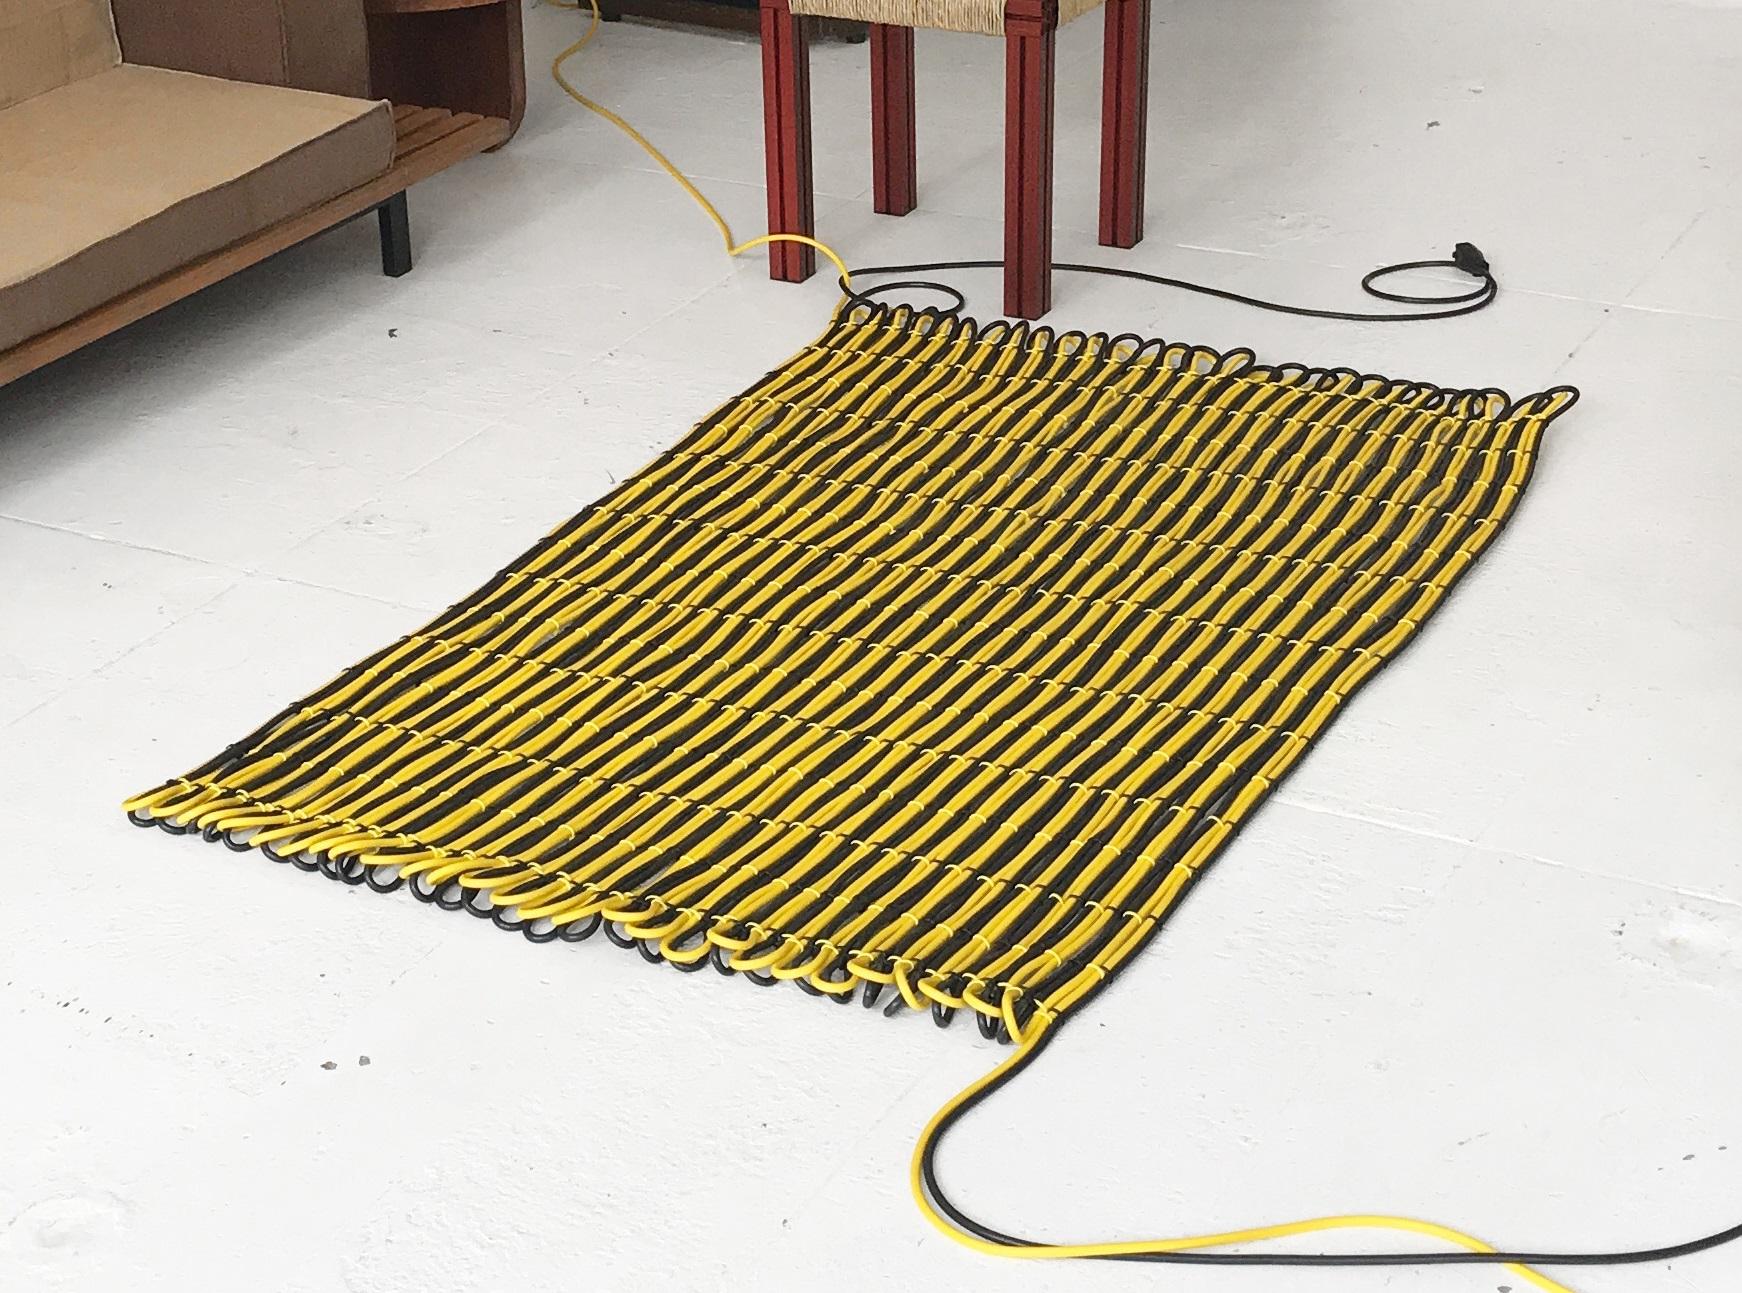 200 Meter cable rug by Tino Seubert.
Dimensions: W 105 x L 160 cm (˜ 1.7 m2 surface).
Materials: PVC electricity cable, cable clips, country specific plug and socket.
Cable colours: black, yellow, orange, blue (two can be mixed). 

Tino Seubert
When